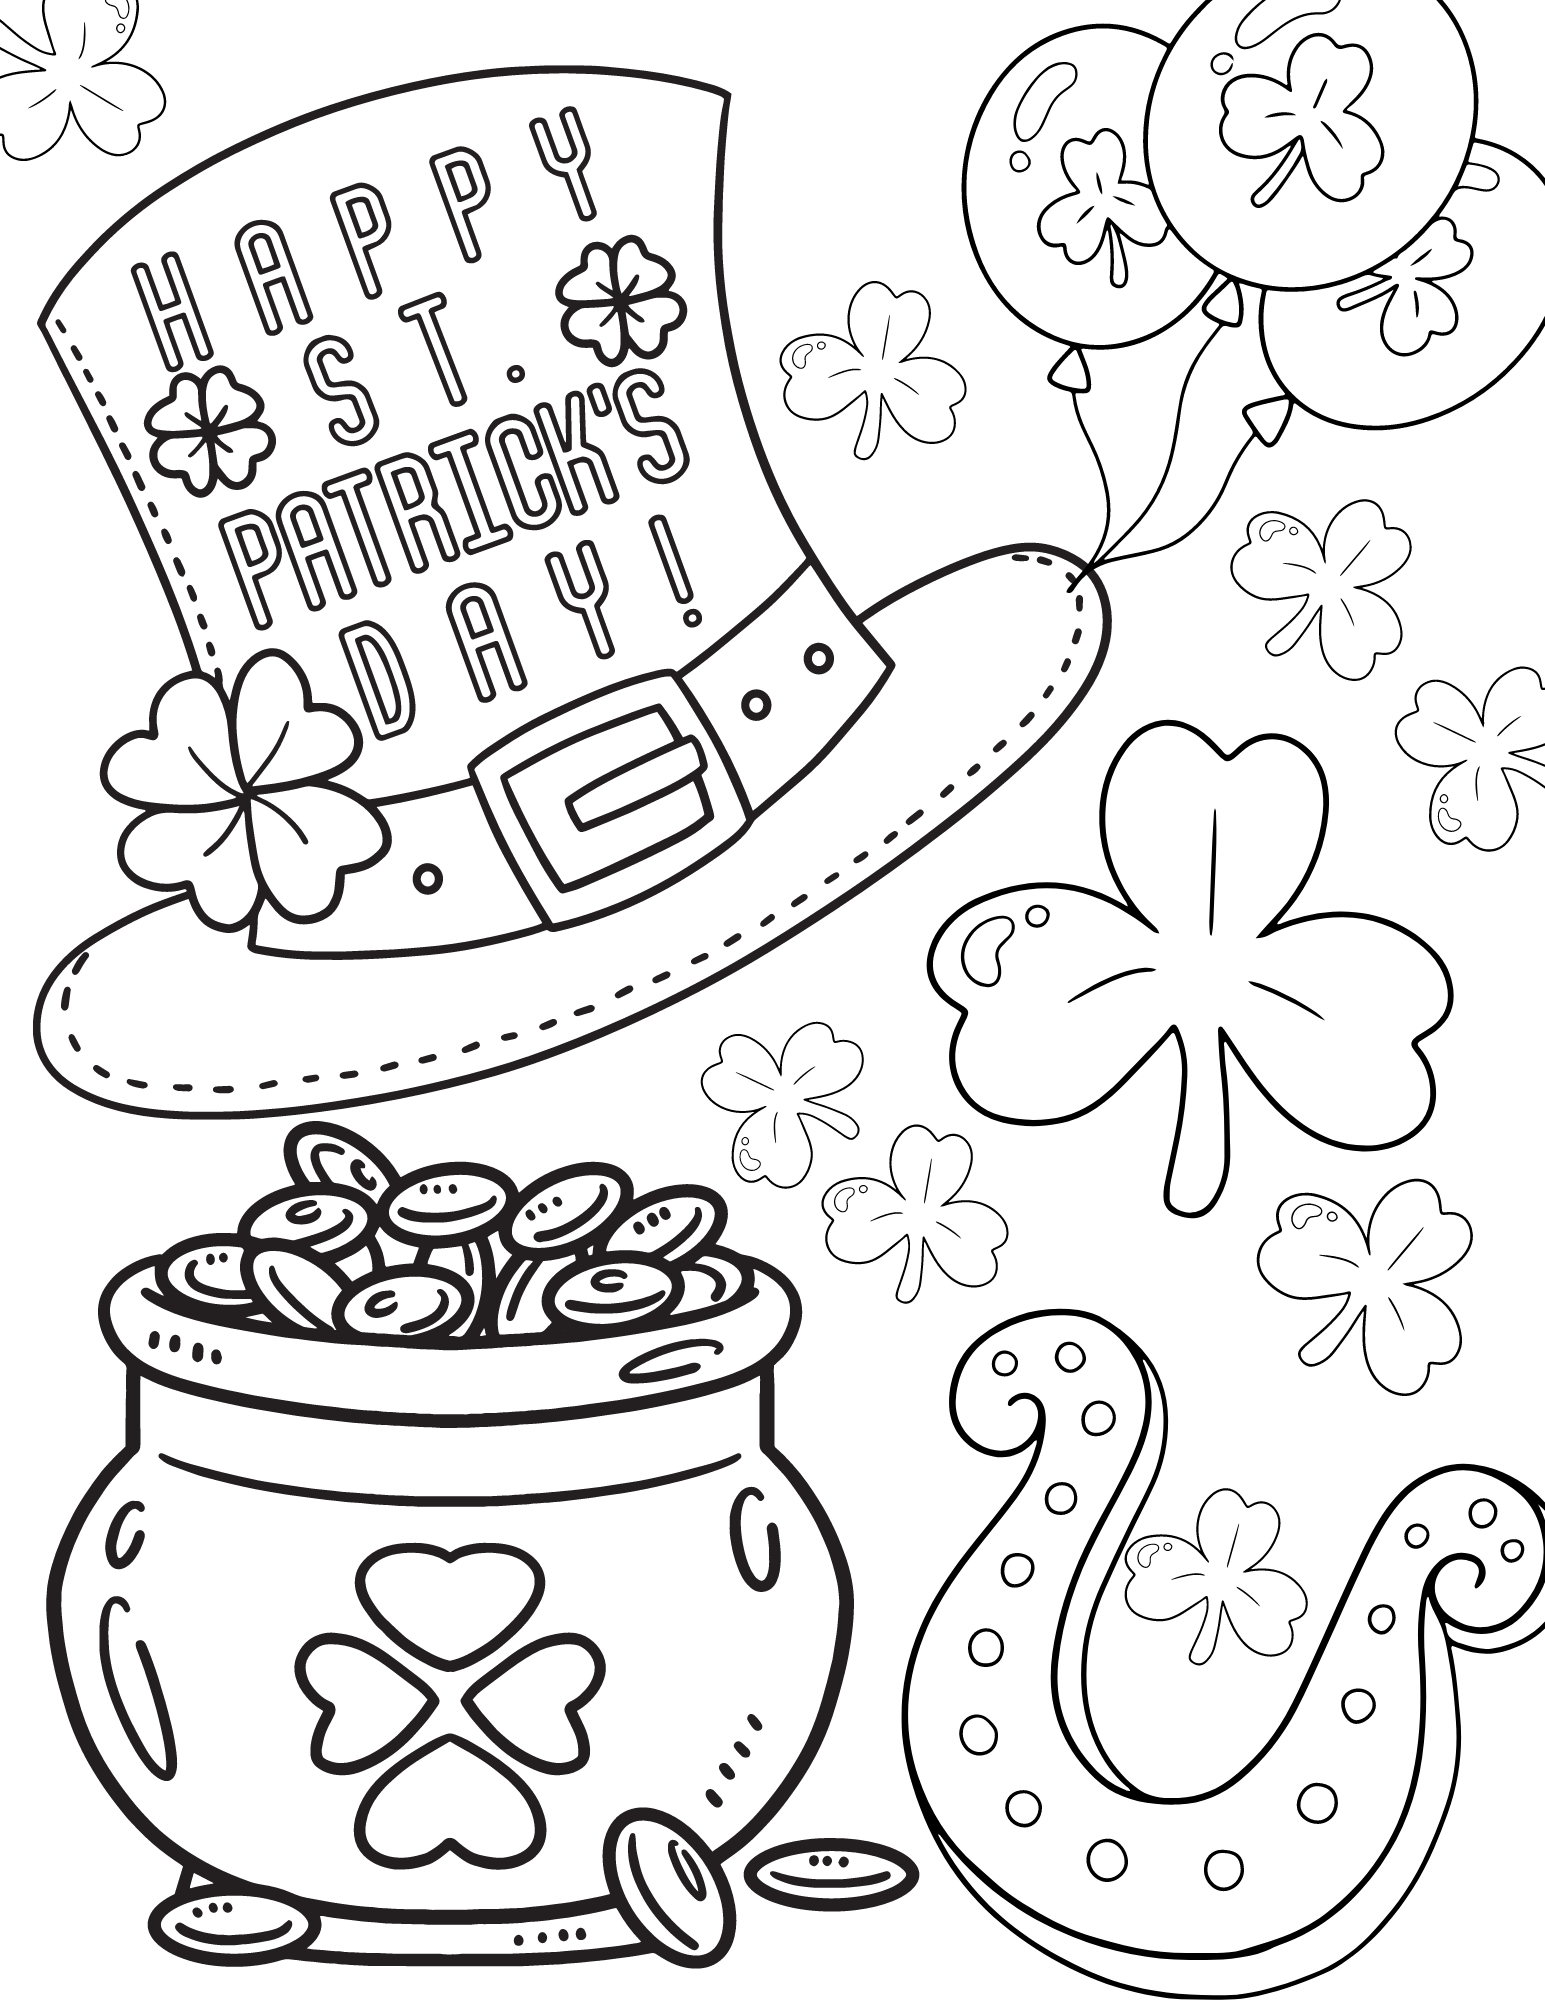 Free Printable Coloring Pages St Patrick S Day Pdf